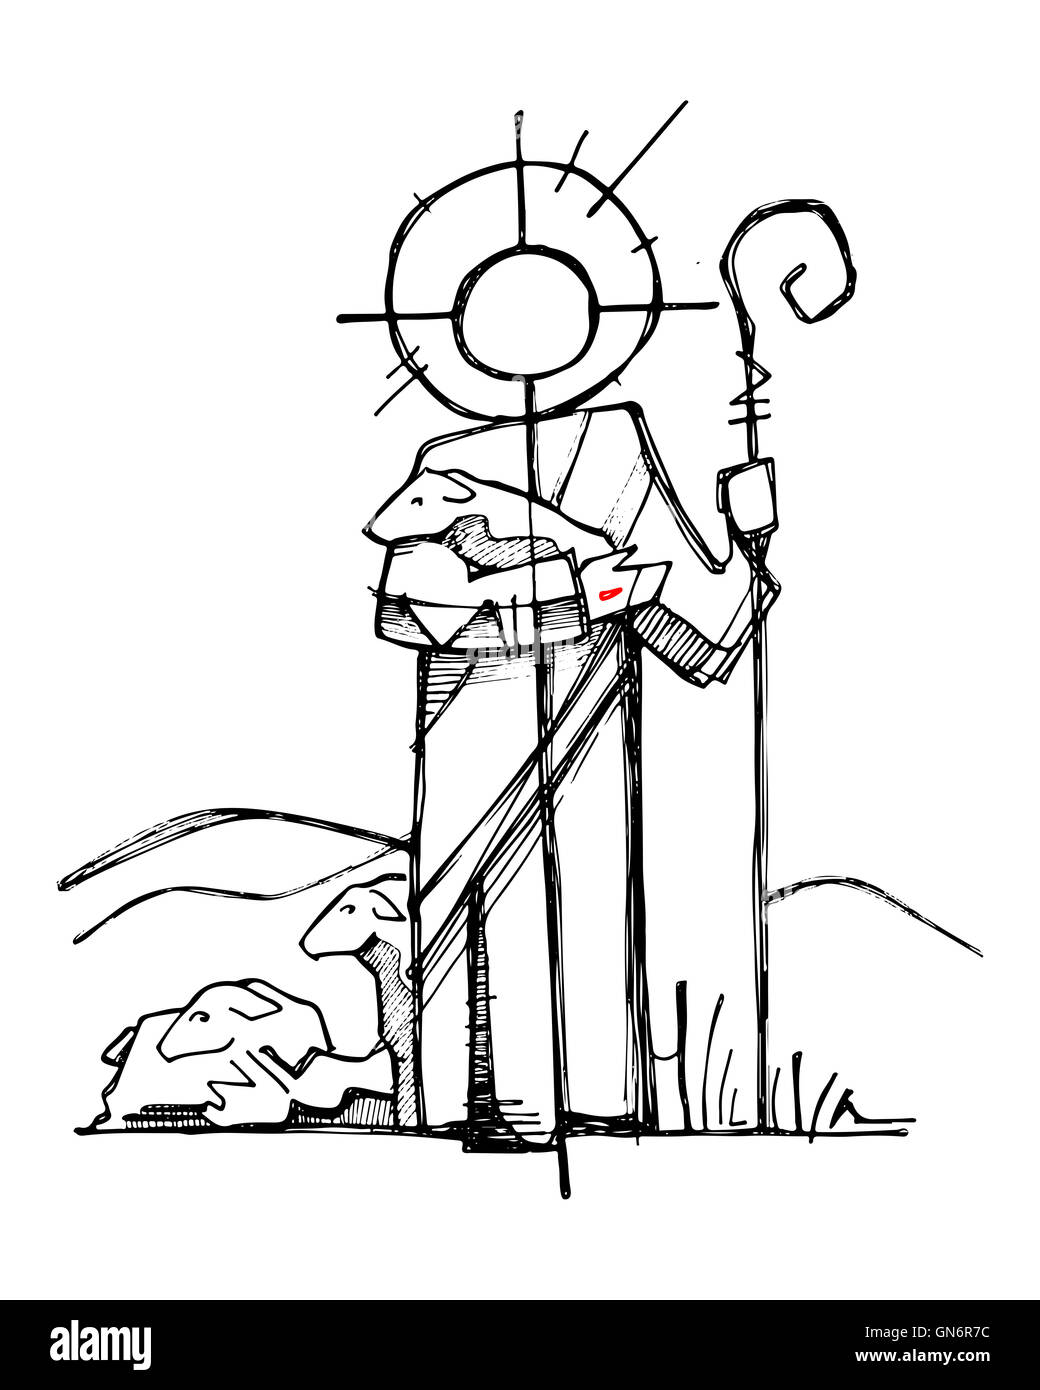 Hand drawn illustration or drawing of Jesus Christ as a Good Shepherd in a minimalist style Stock Photo